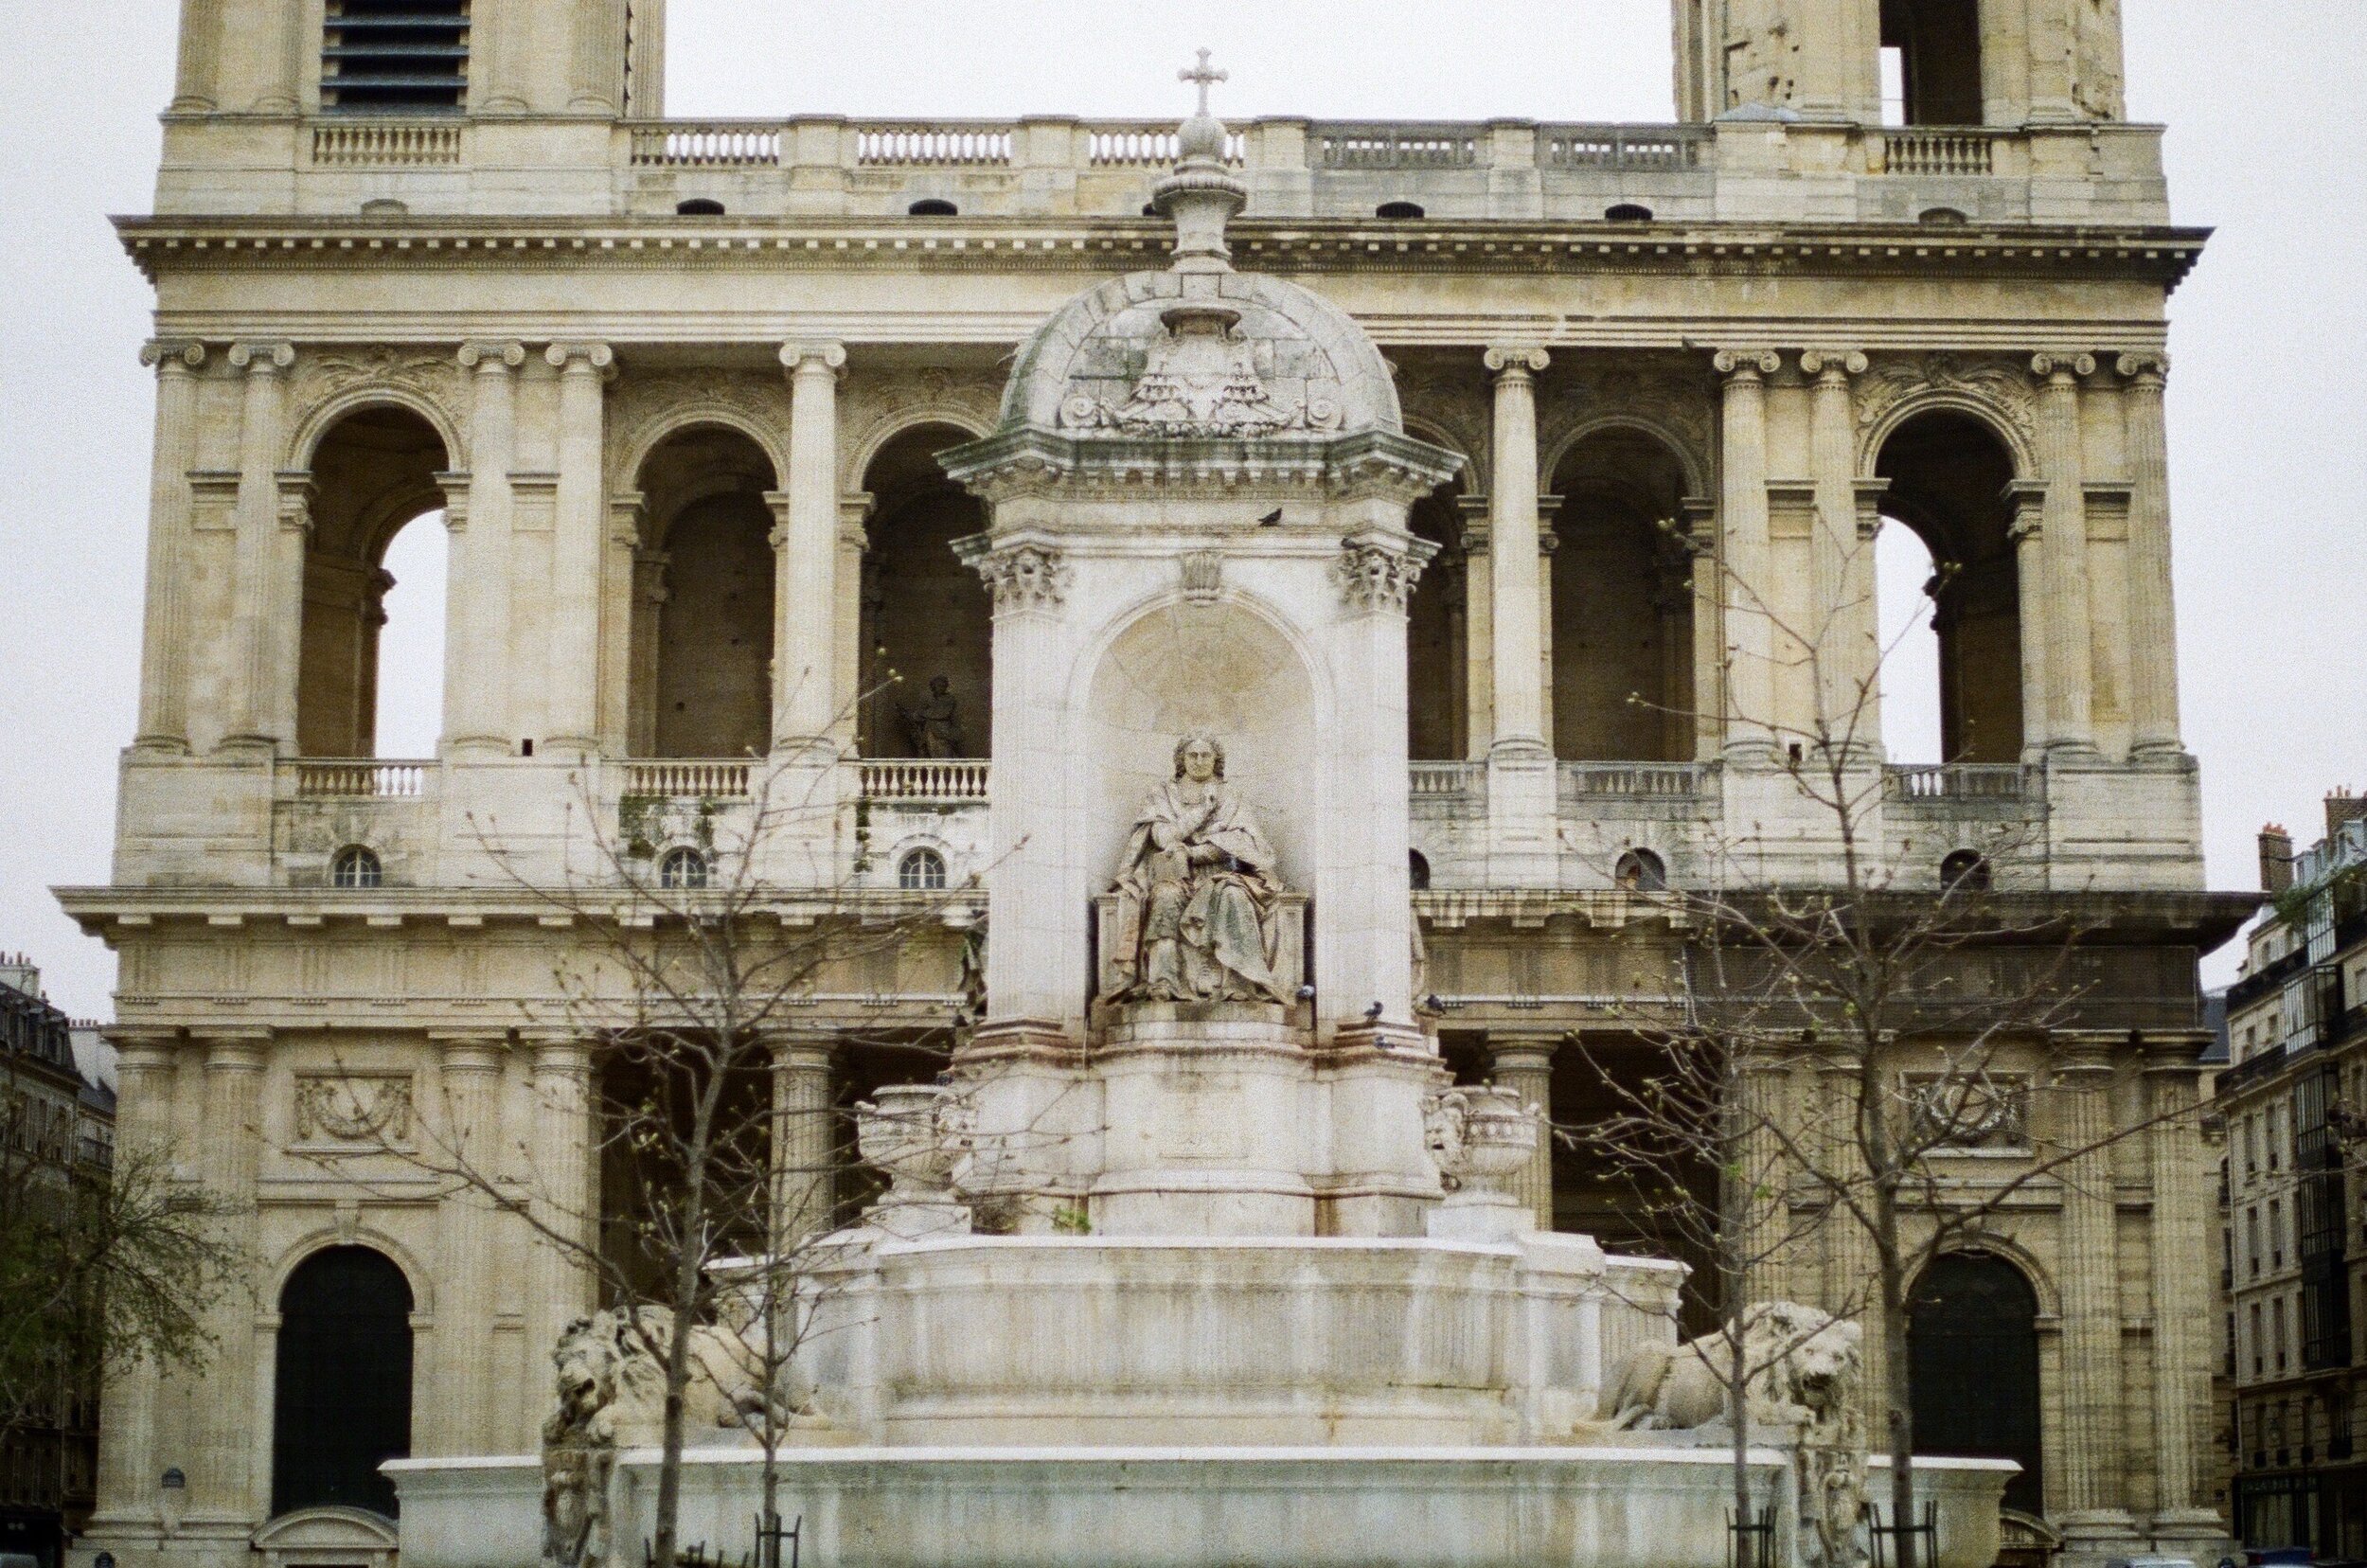   Saint-Sulpice, on the morning of Tuesday, March 17th.  